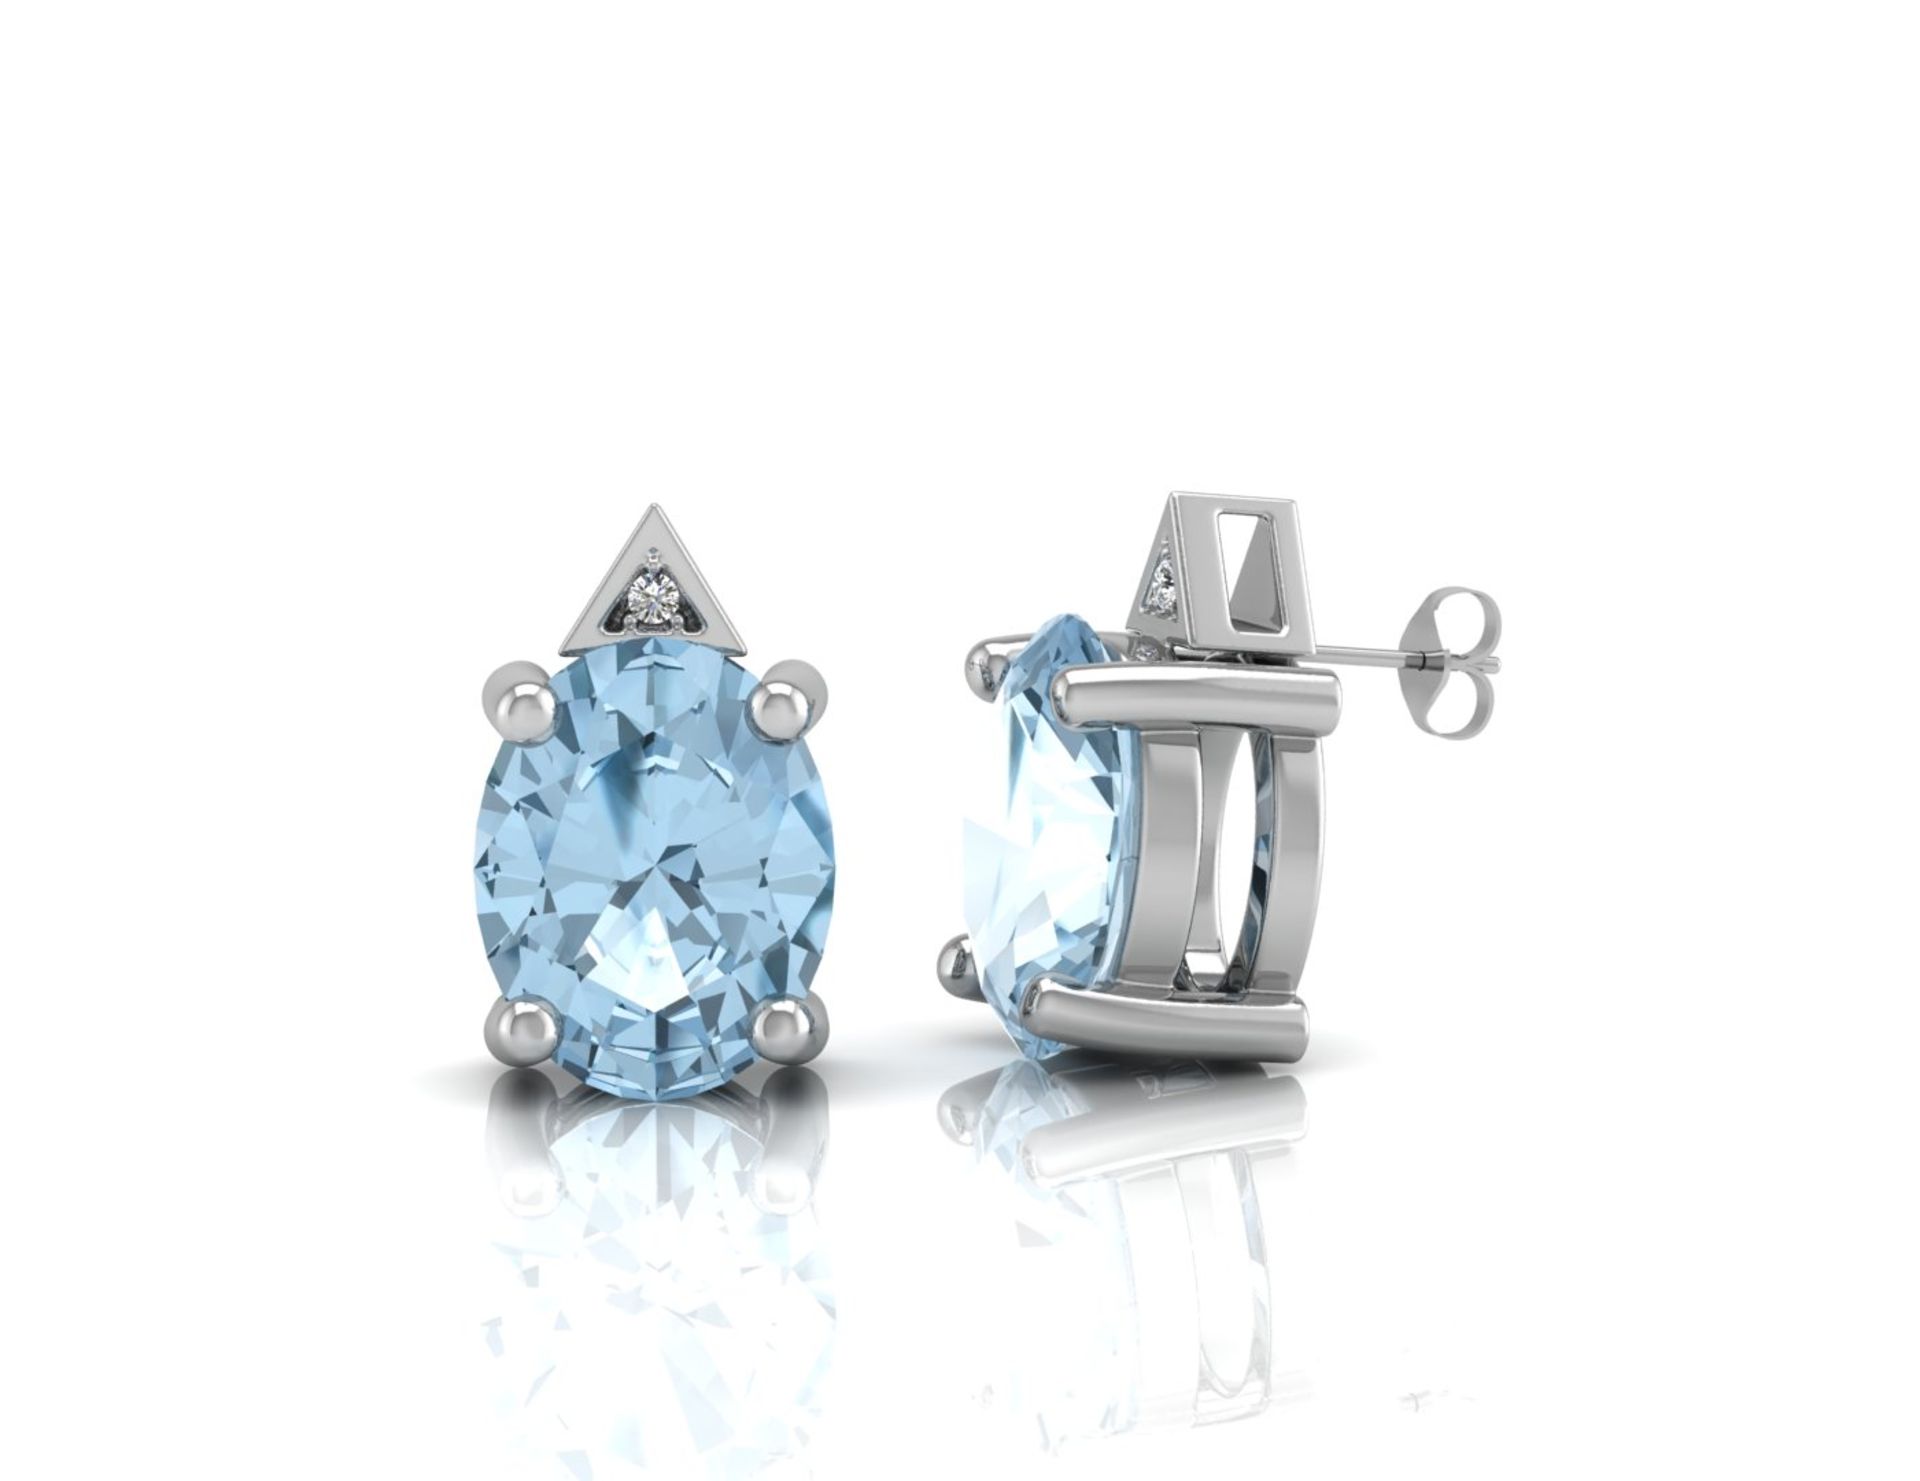 9ct White Gold Diamond And Blue Topaz Earring 0.01 Carats - Valued by GIE £899.00 - A beautiful oval